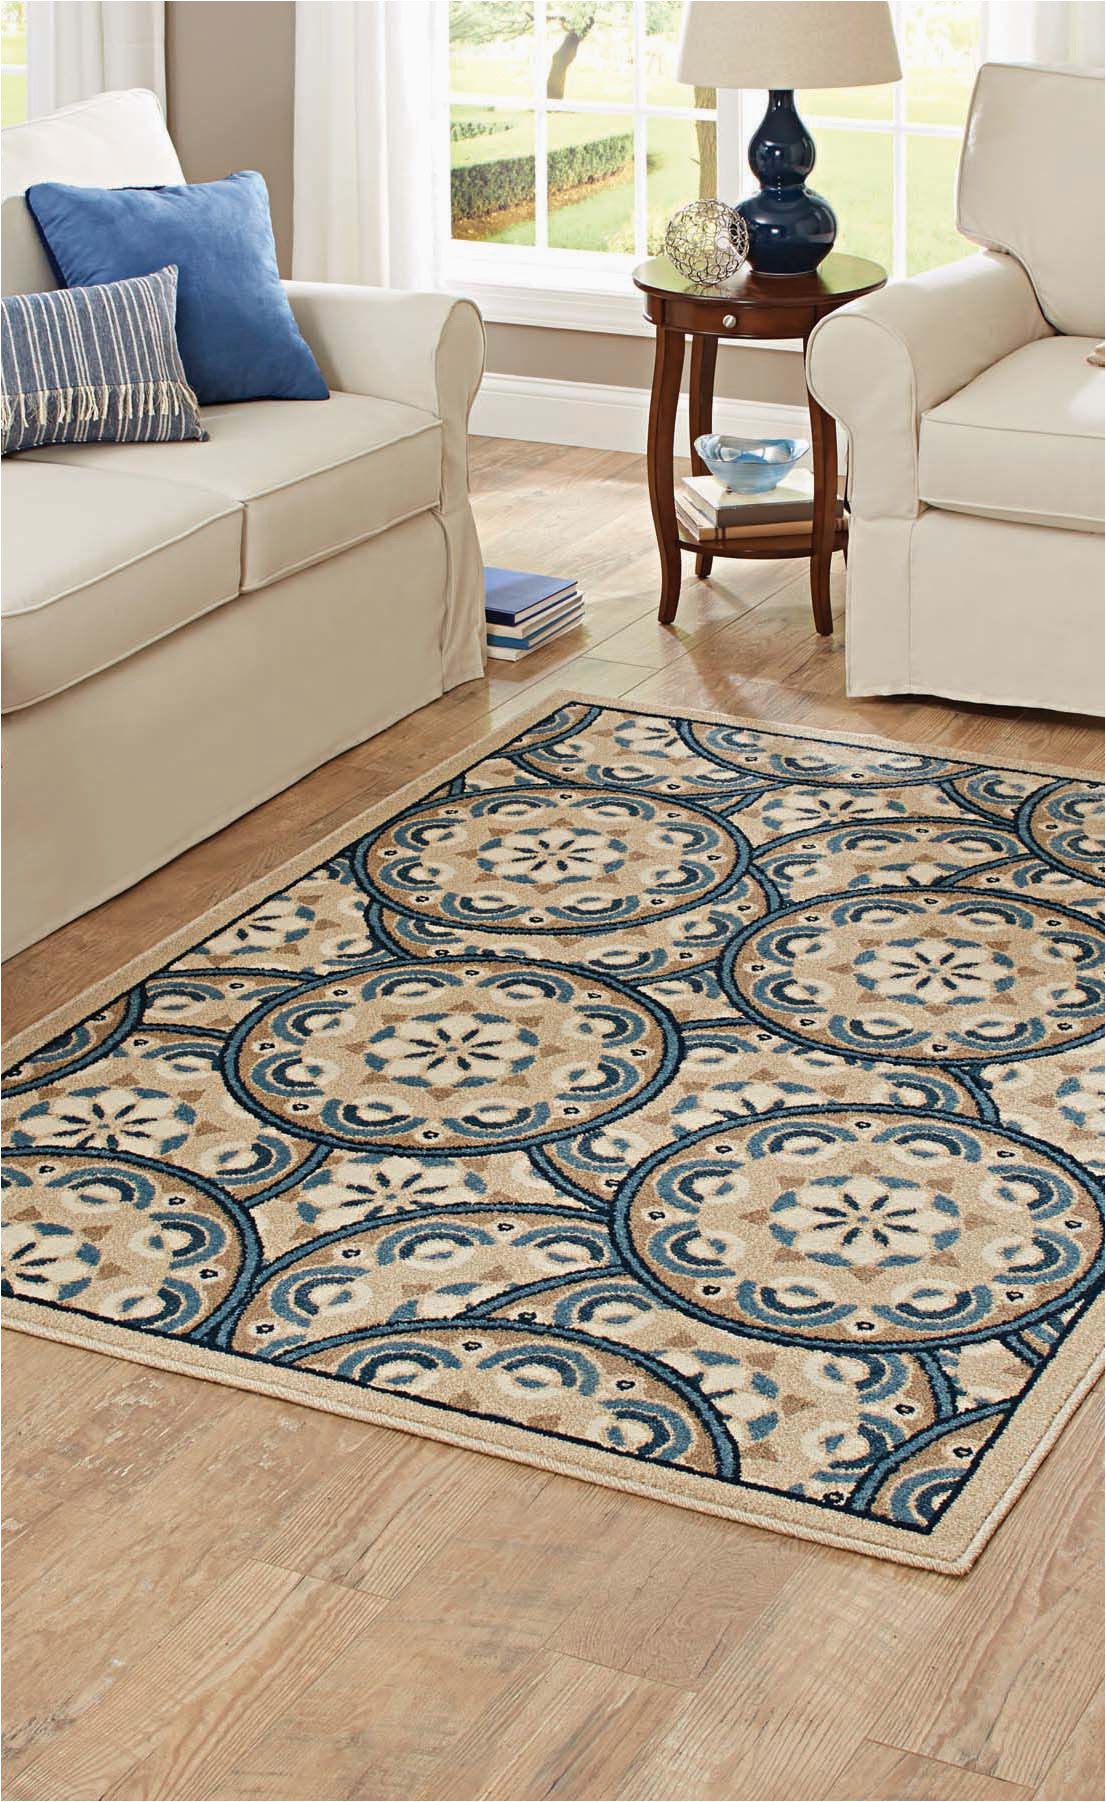 Better Homes and Gardens area Rugs at Walmart Better Homes & Gardens Blue tokens area Rug Walmart